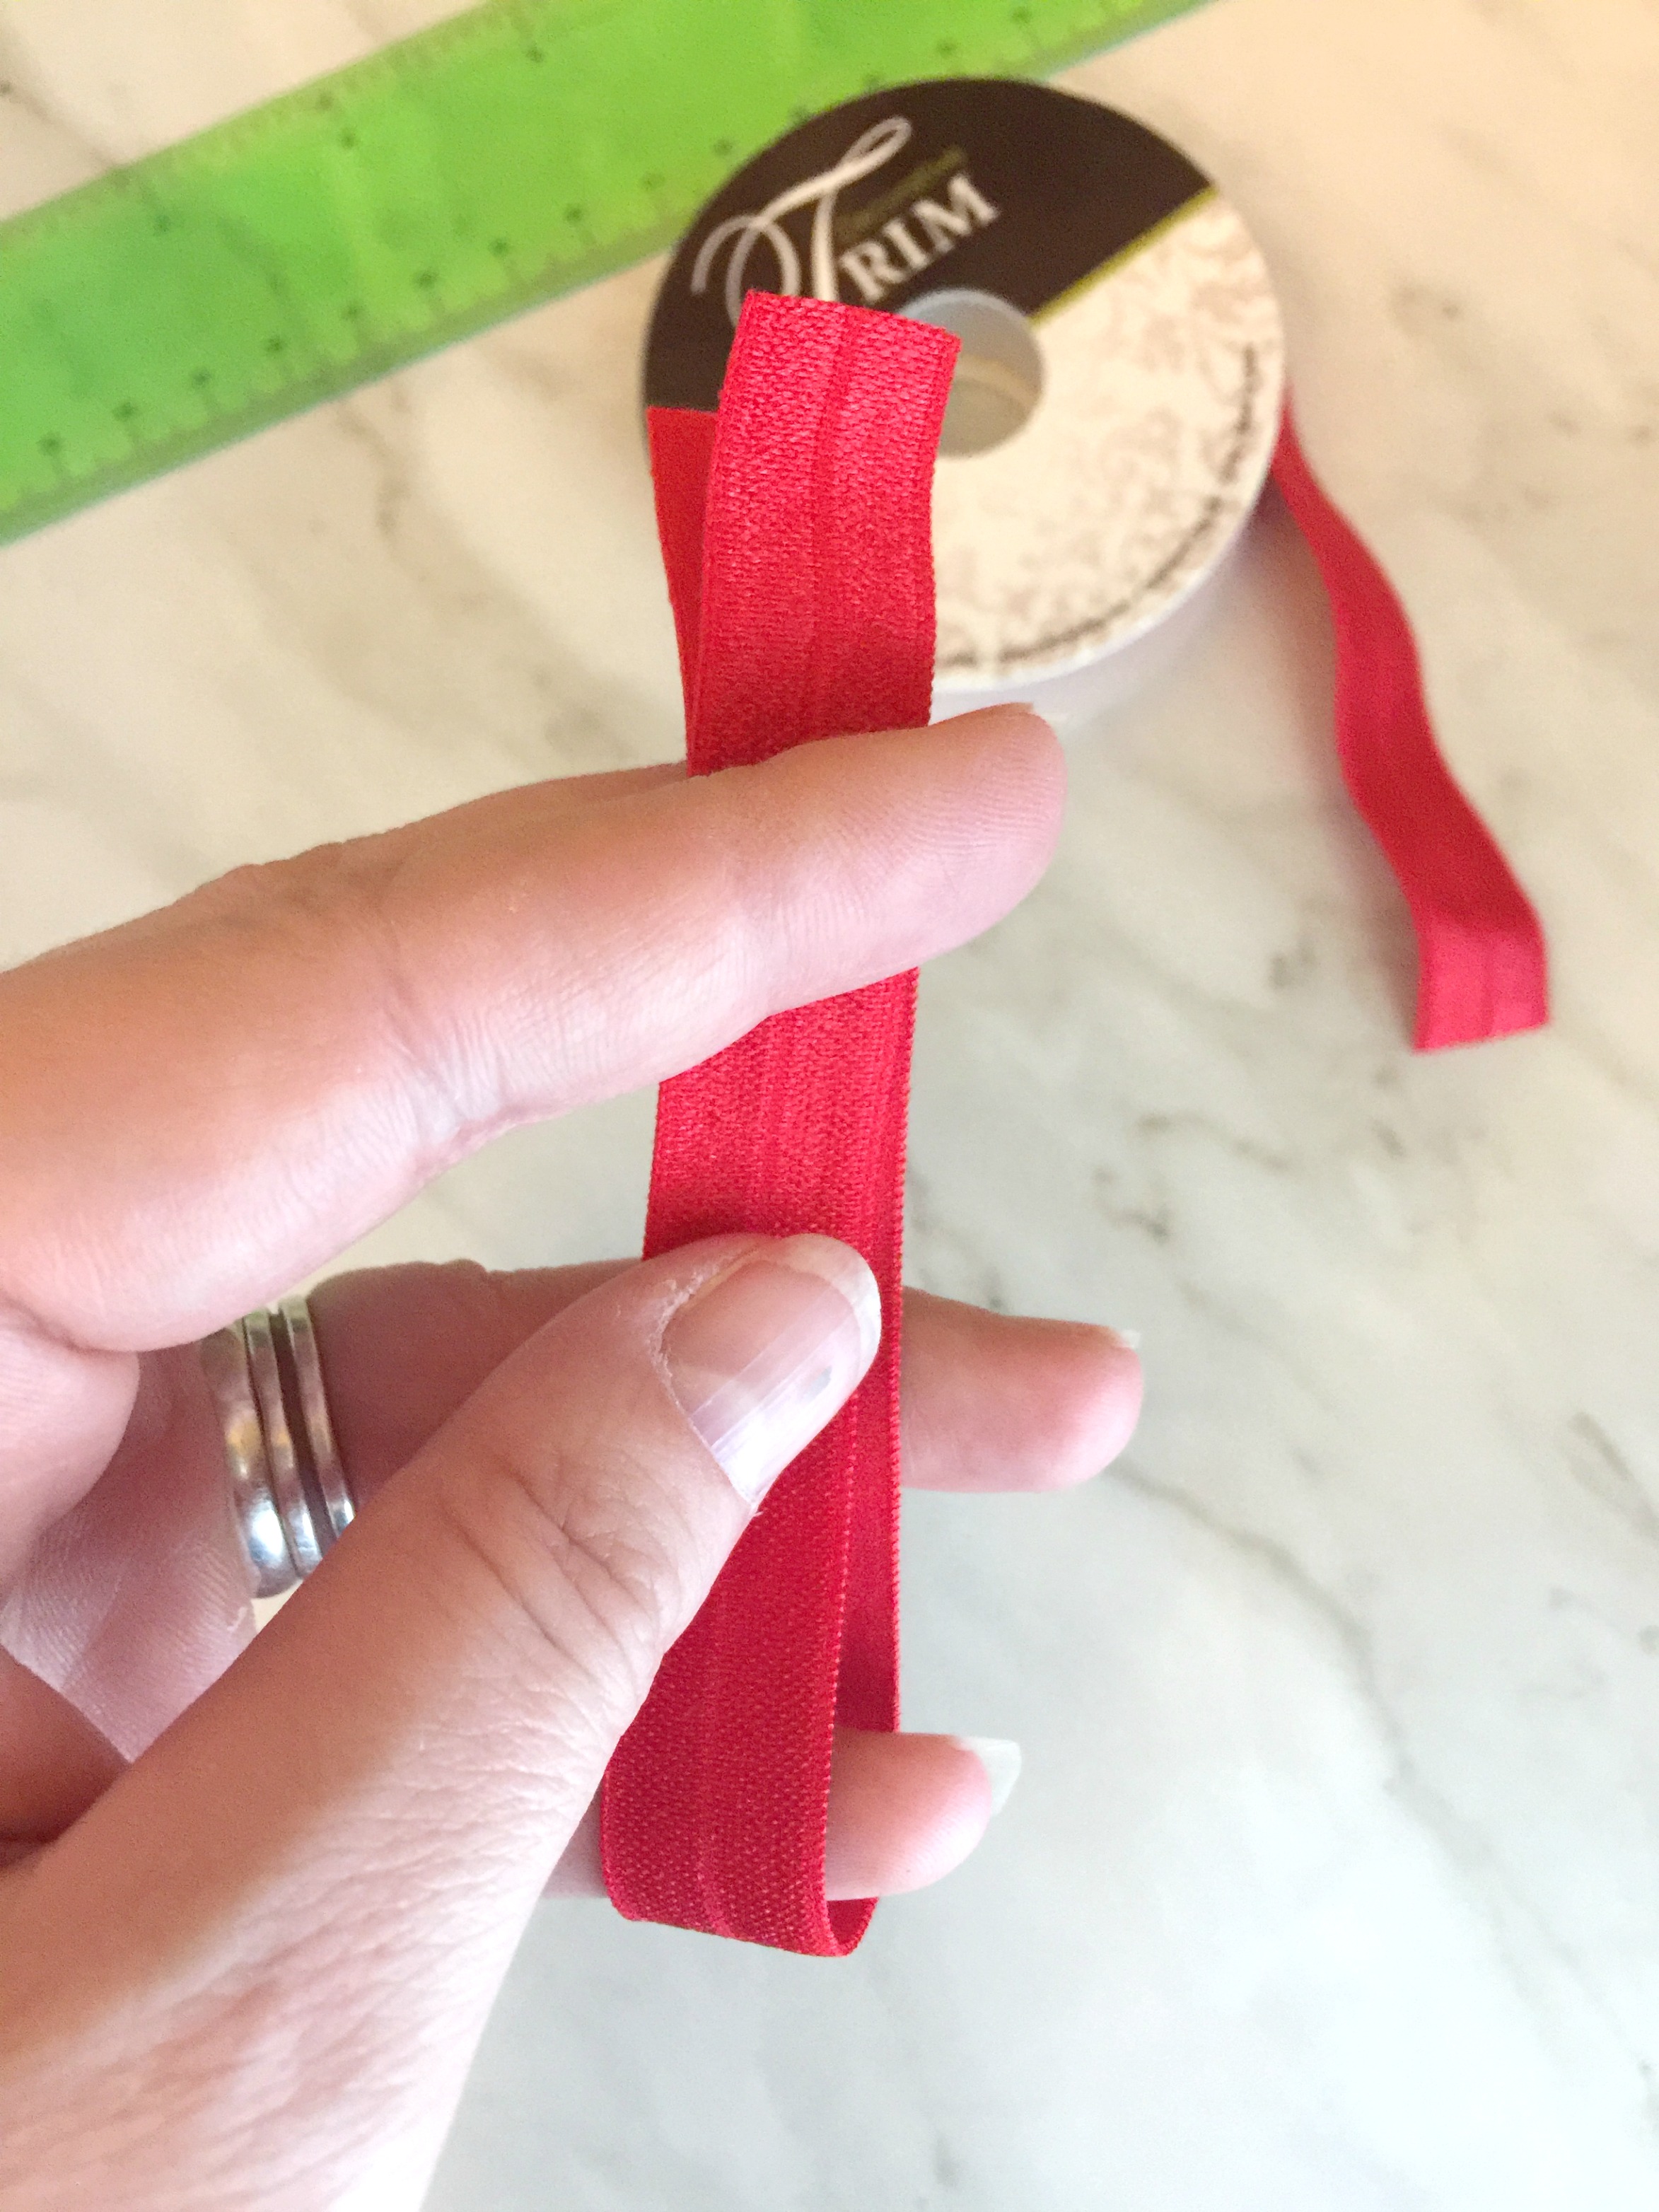 Going on a Disney cruise? Looking for Fish Extender gift ideas? Make these Disney cruise inspired DIY Hair Ties from fold over elastic.